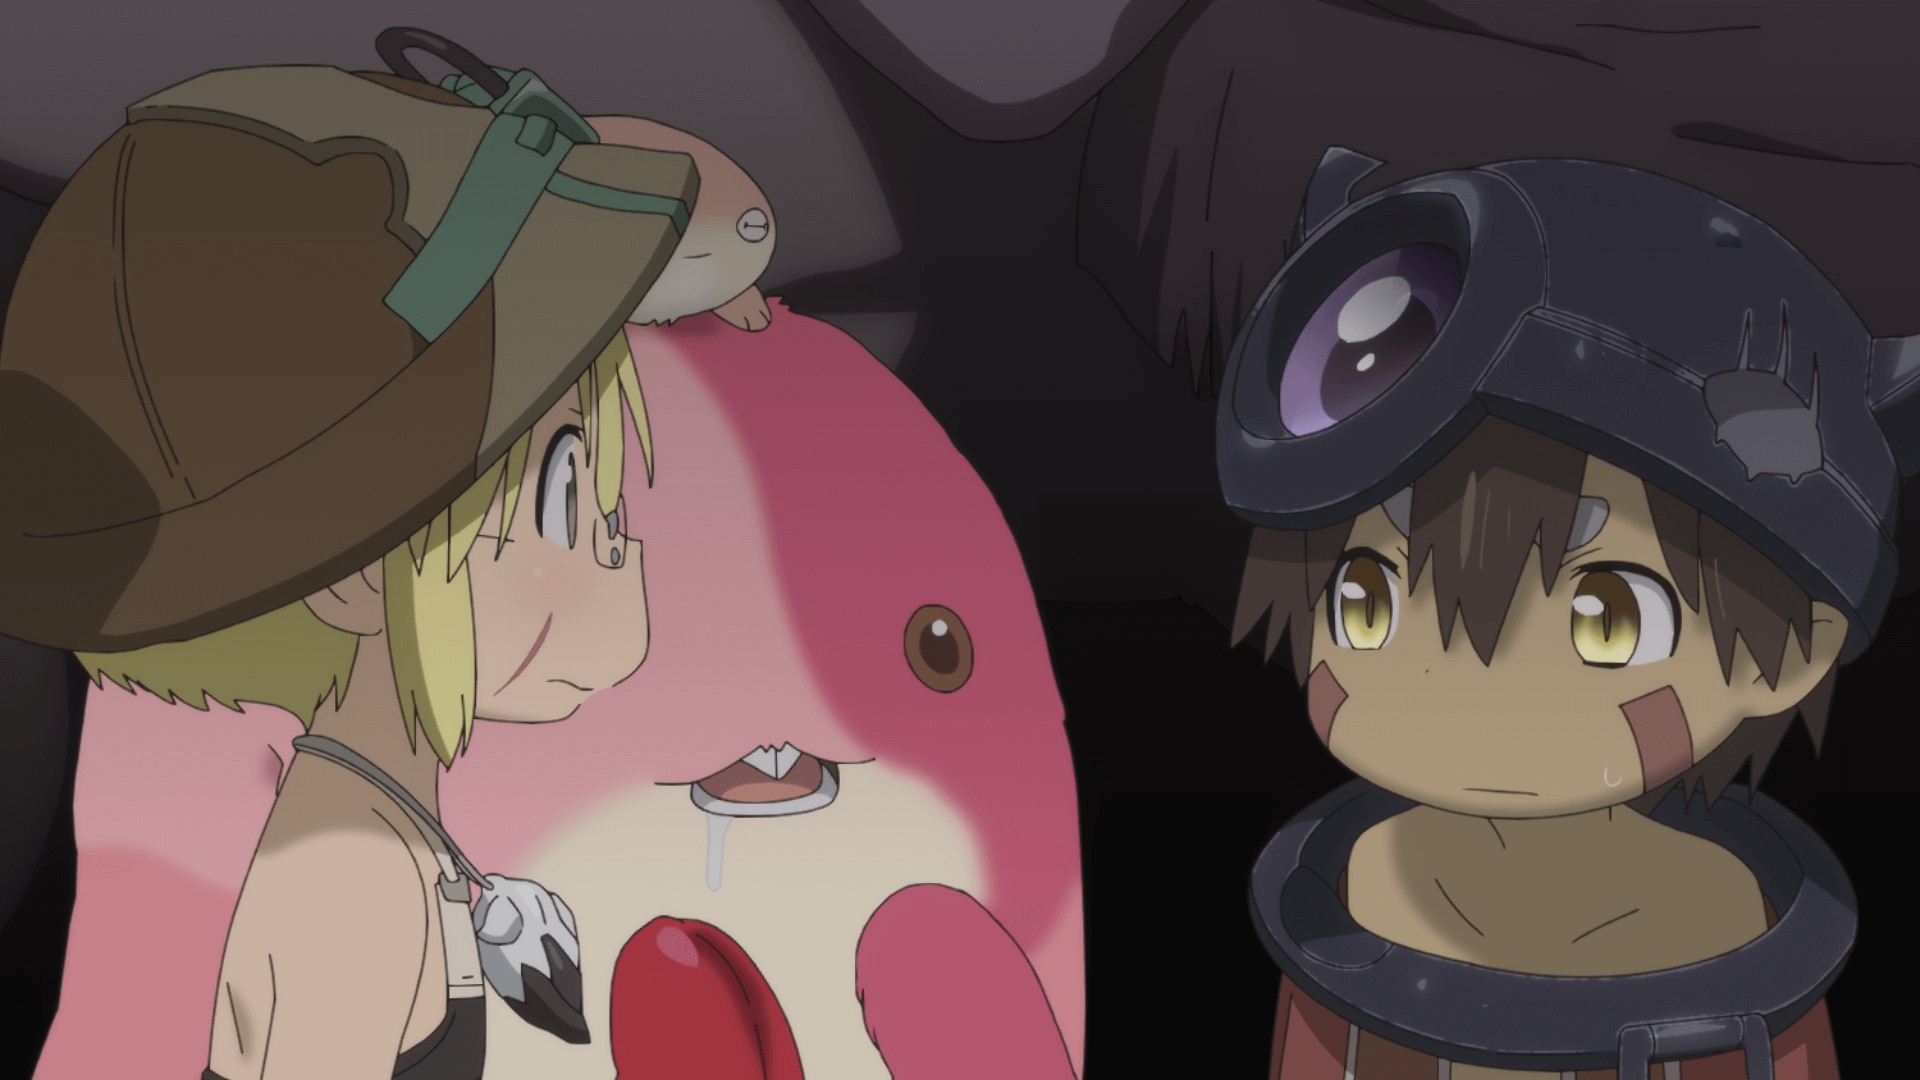 Made in Abyss The Compass Pointed to the Darkness (TV Episode